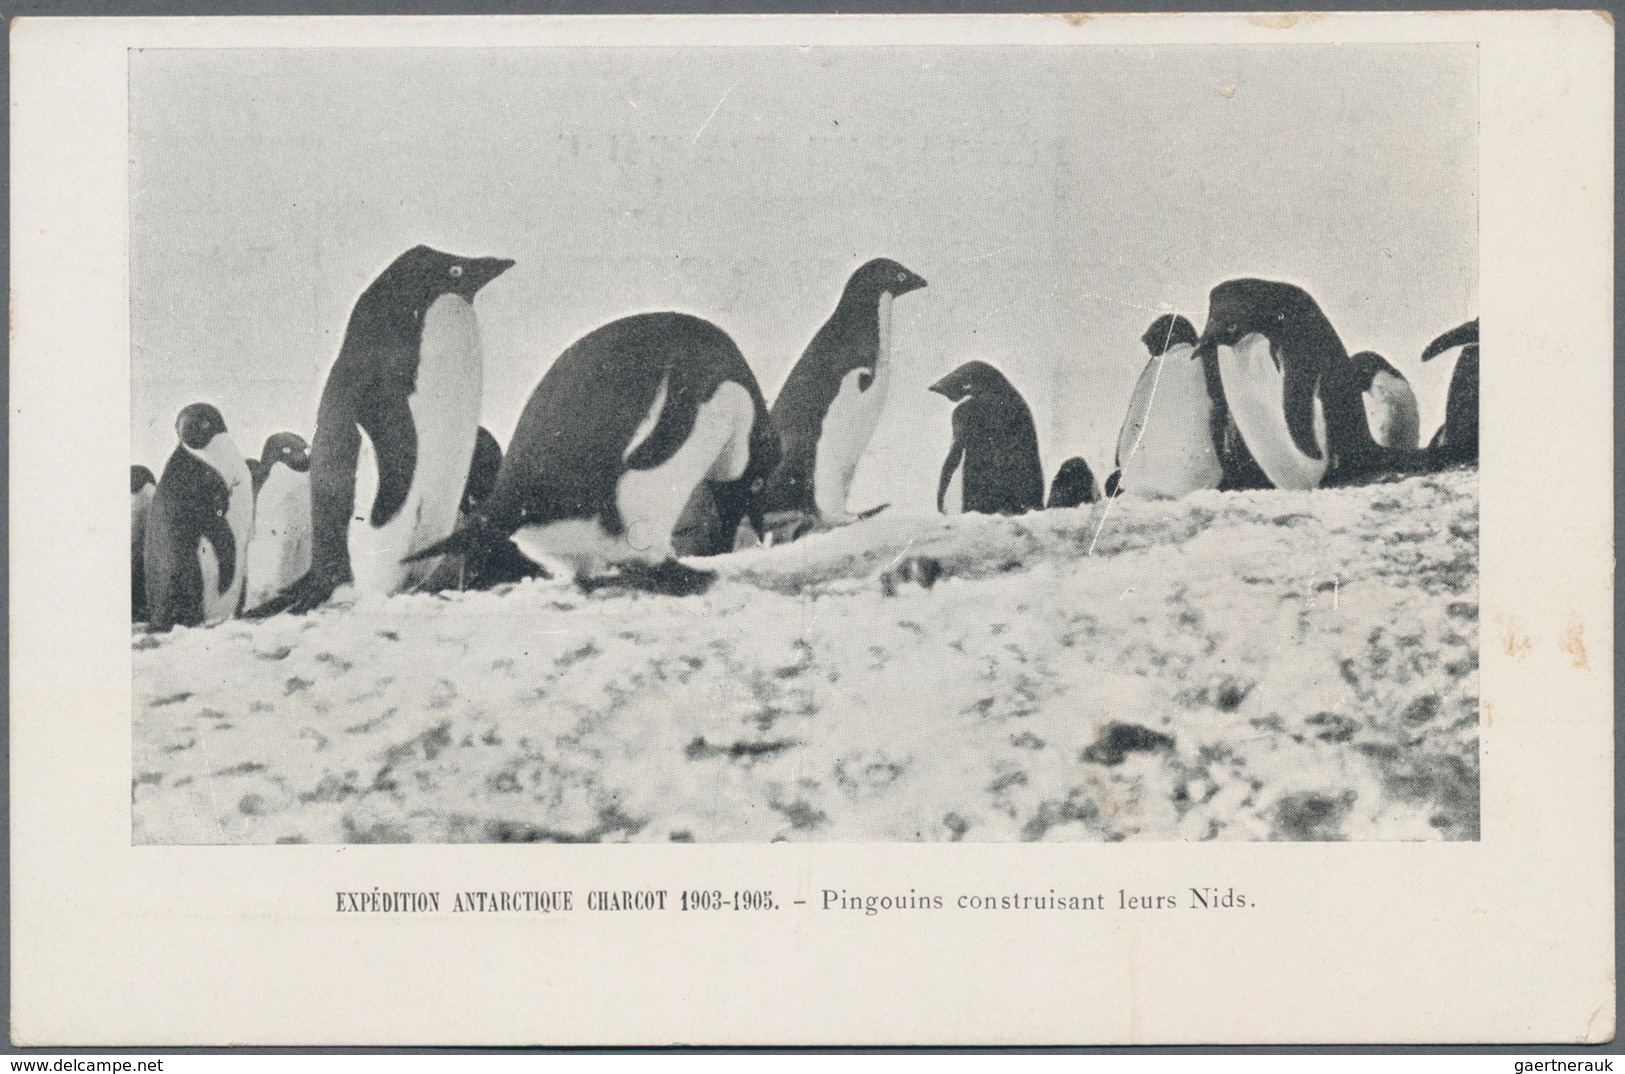 Thematik: Antarktis / antarctic: 1903/05, French Antarctic expedition "Misson Charcot", six official